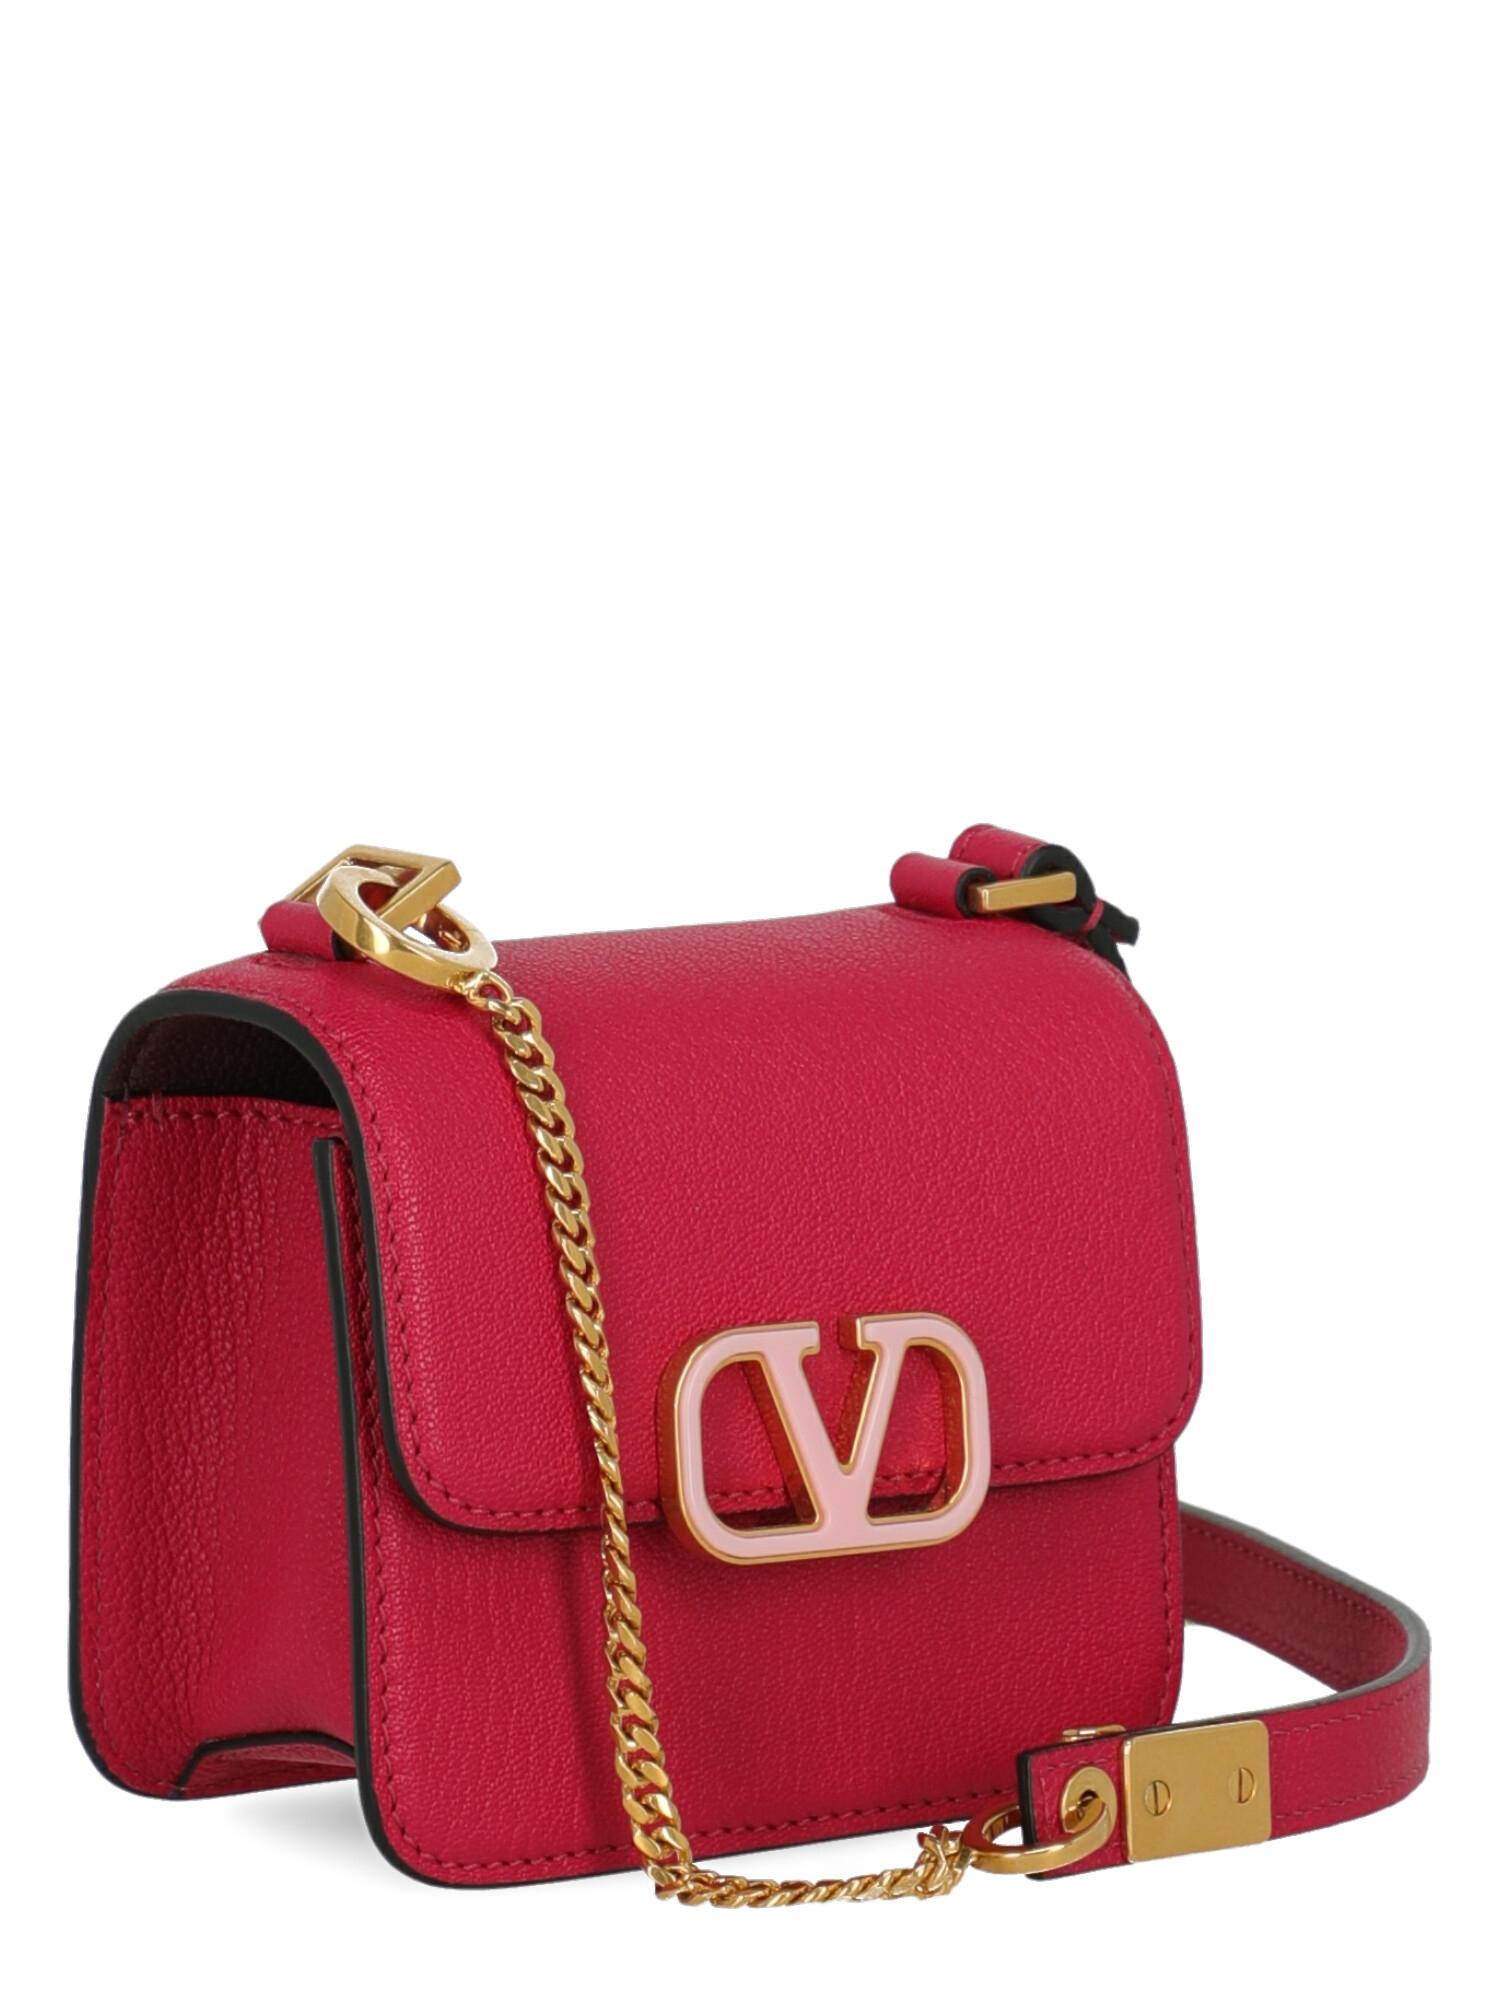 Valentino Woman Shoulder bag  Pink Leather In Excellent Condition For Sale In Milan, IT